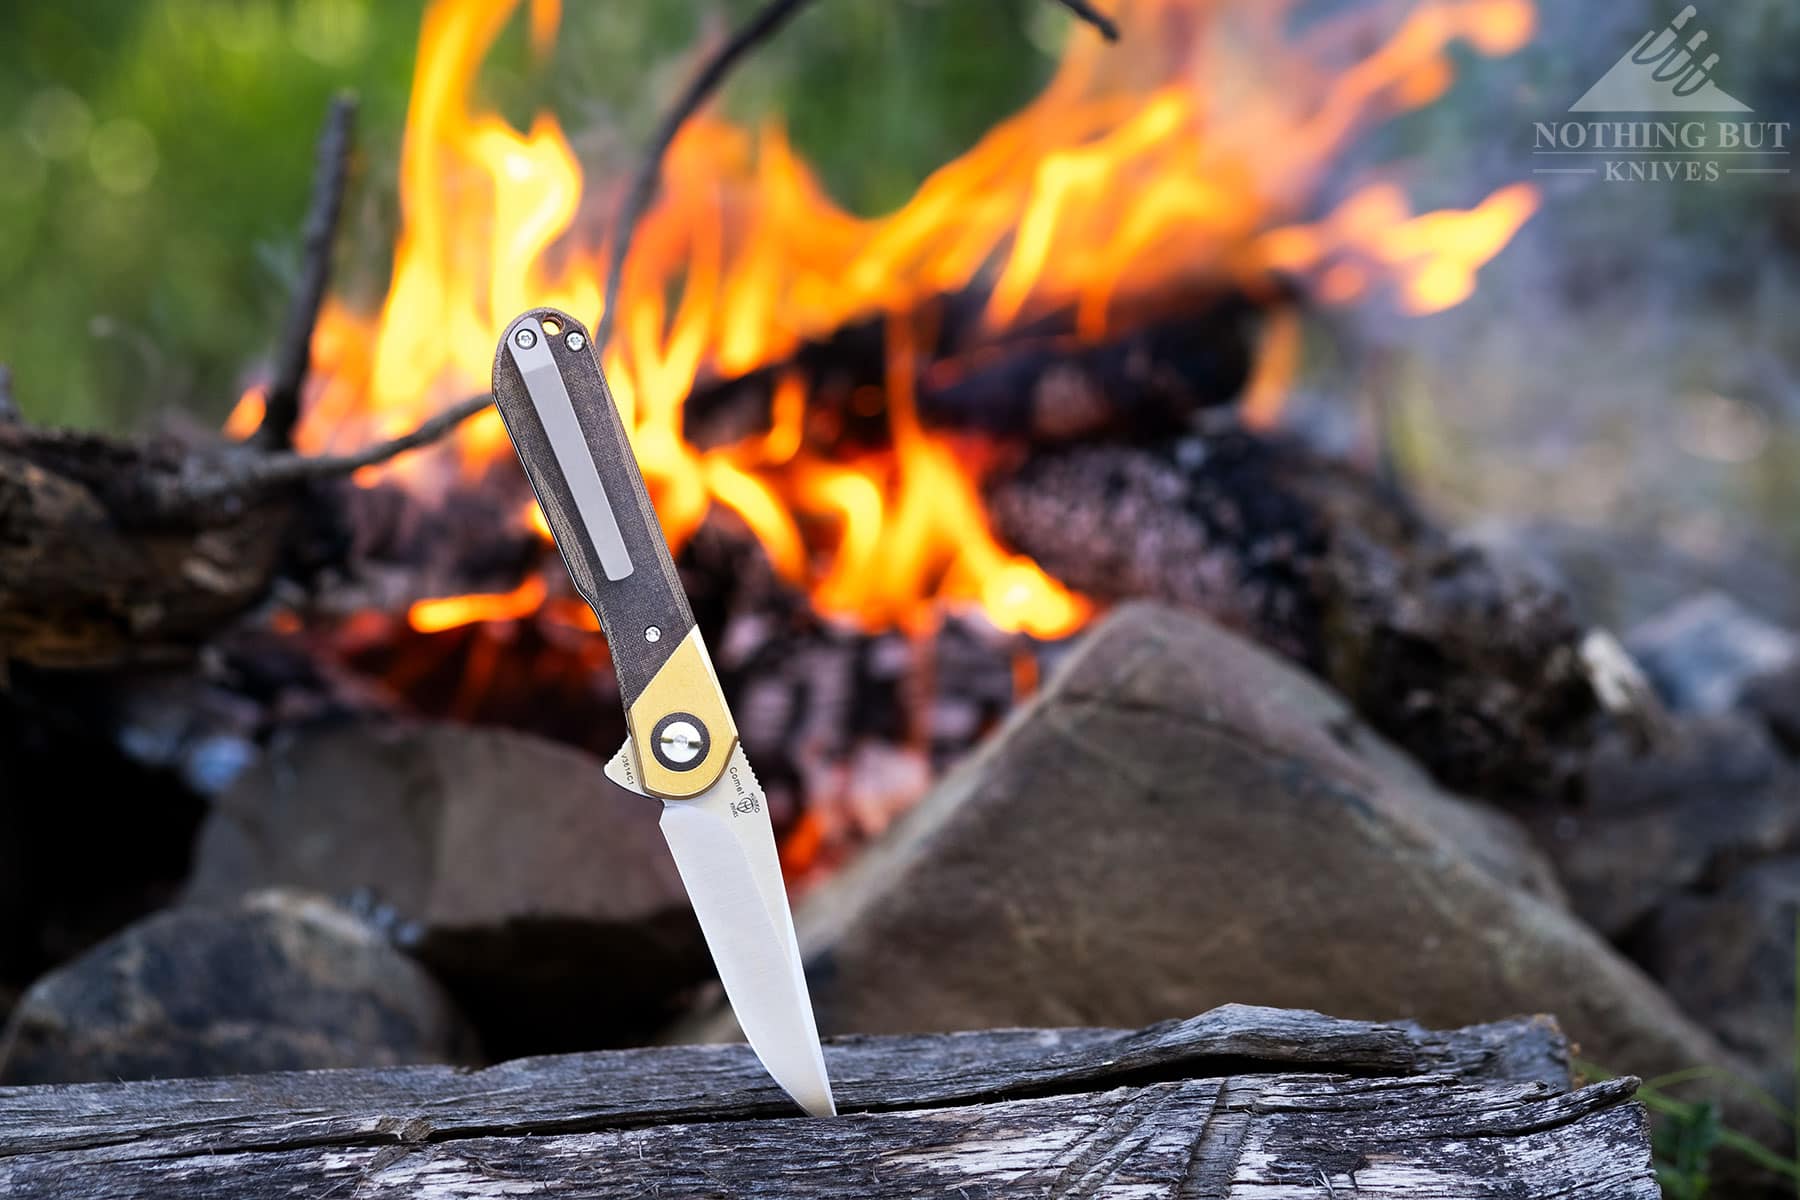 The Kizer Comet stabbed into a charred log in front of a fire.